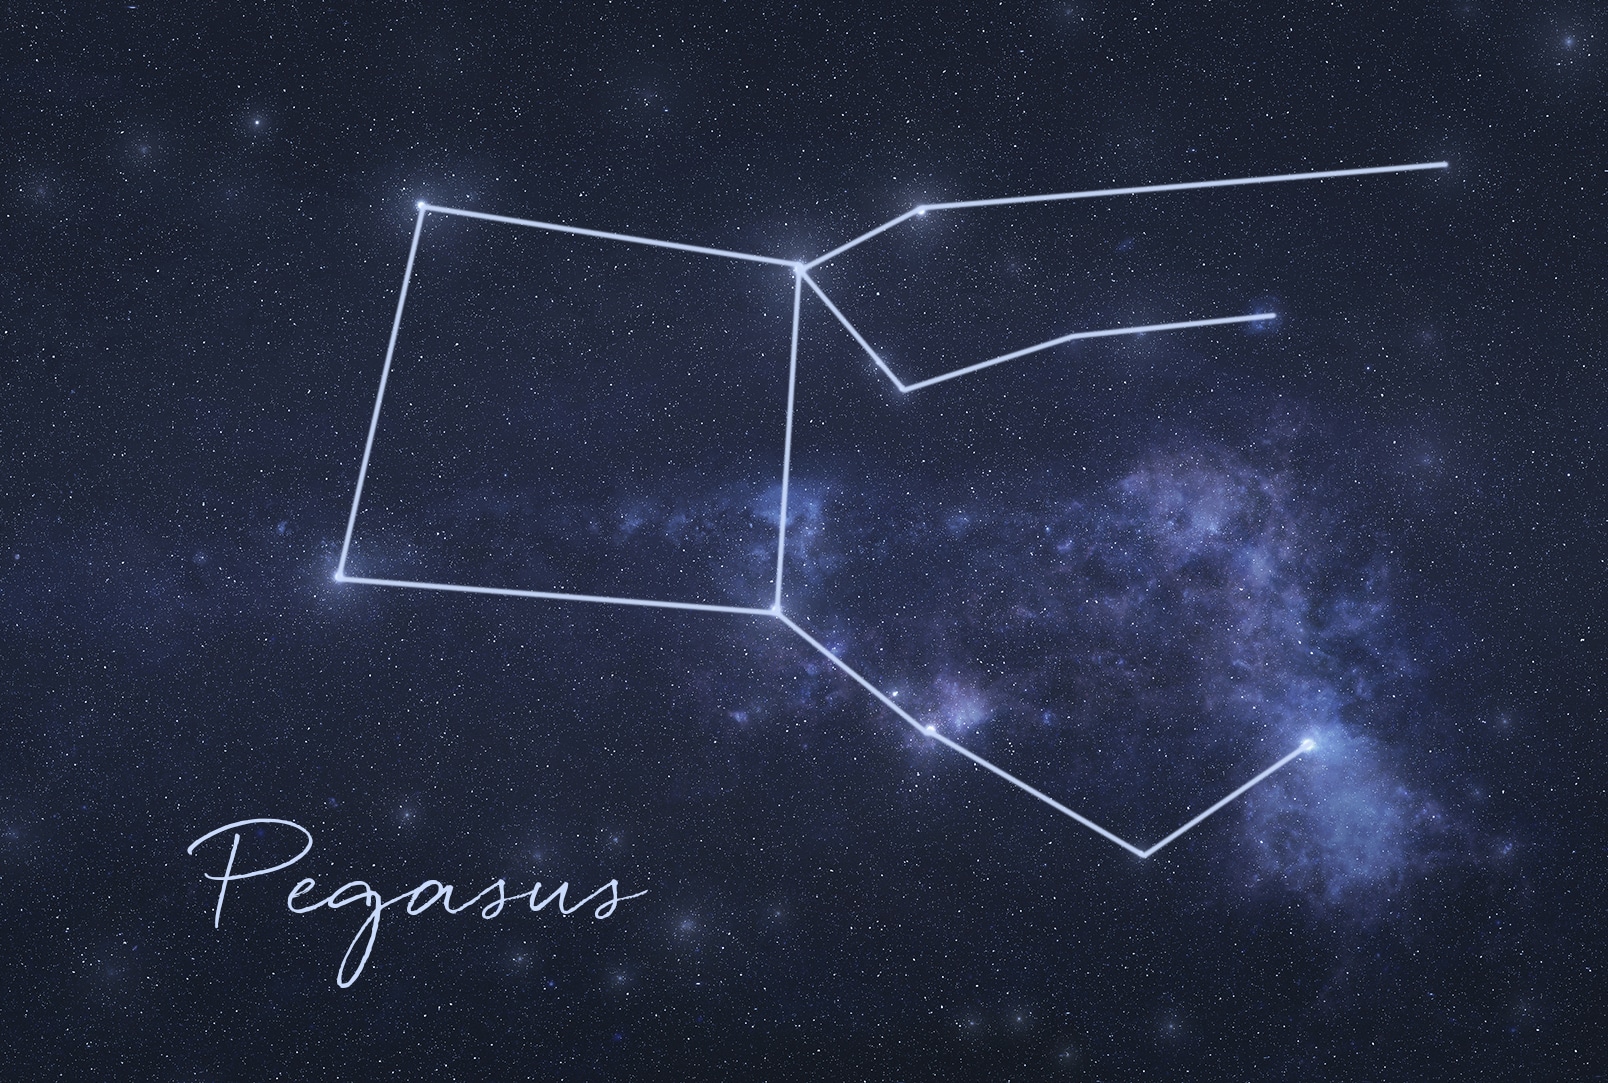 The Pegasus constellation is famous for hosting the first exoplanet ever found around a normal star (an exoplanet is a planet beyond our own solar system).